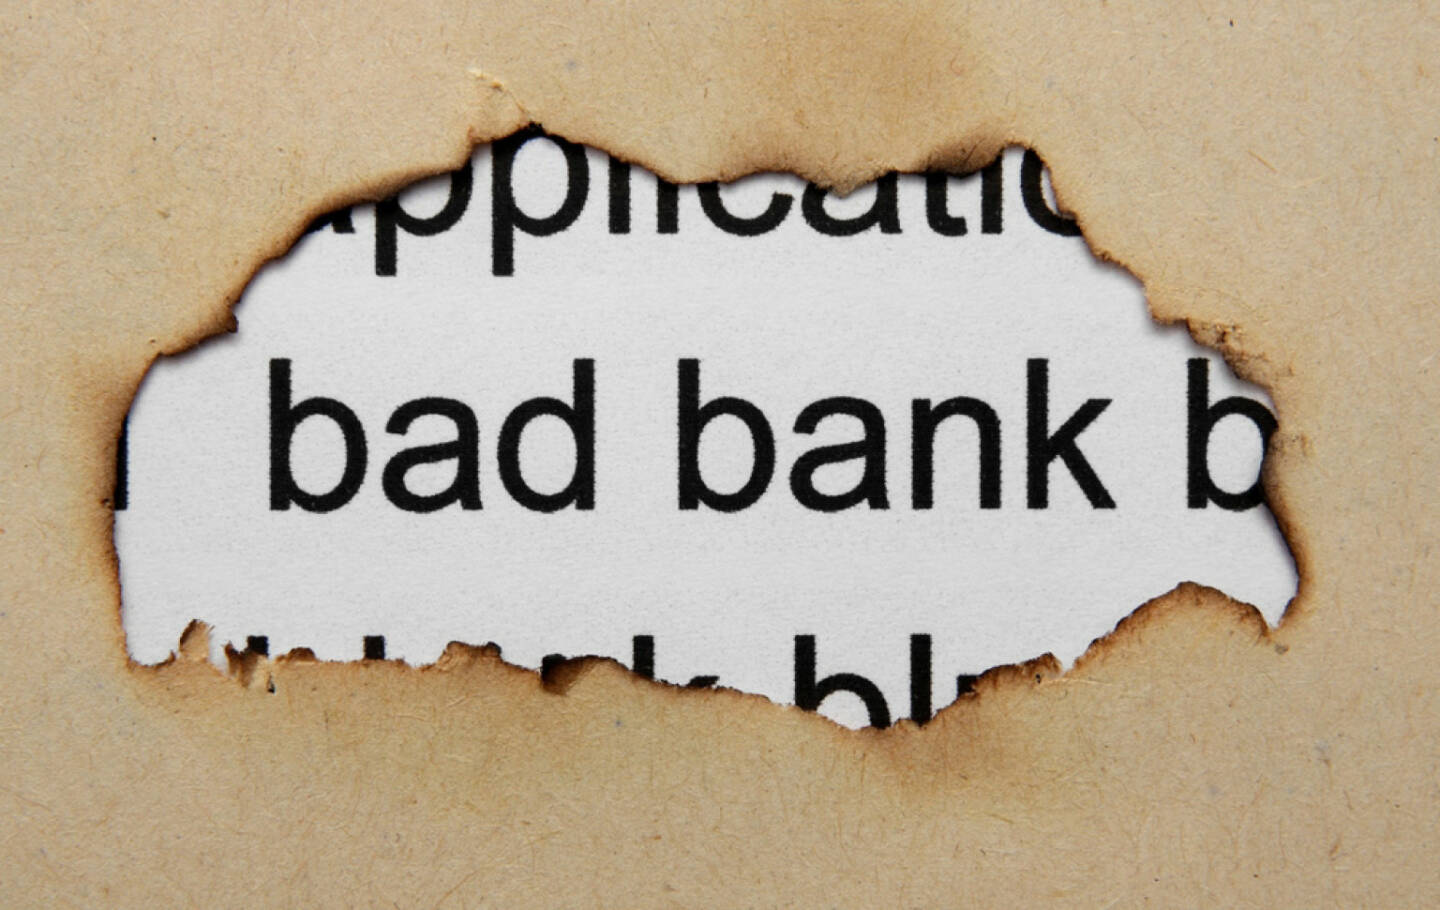 bad bank, http://www.shutterstock.com/de/pic-141197686/stock-photo-bad-banking-concept.html